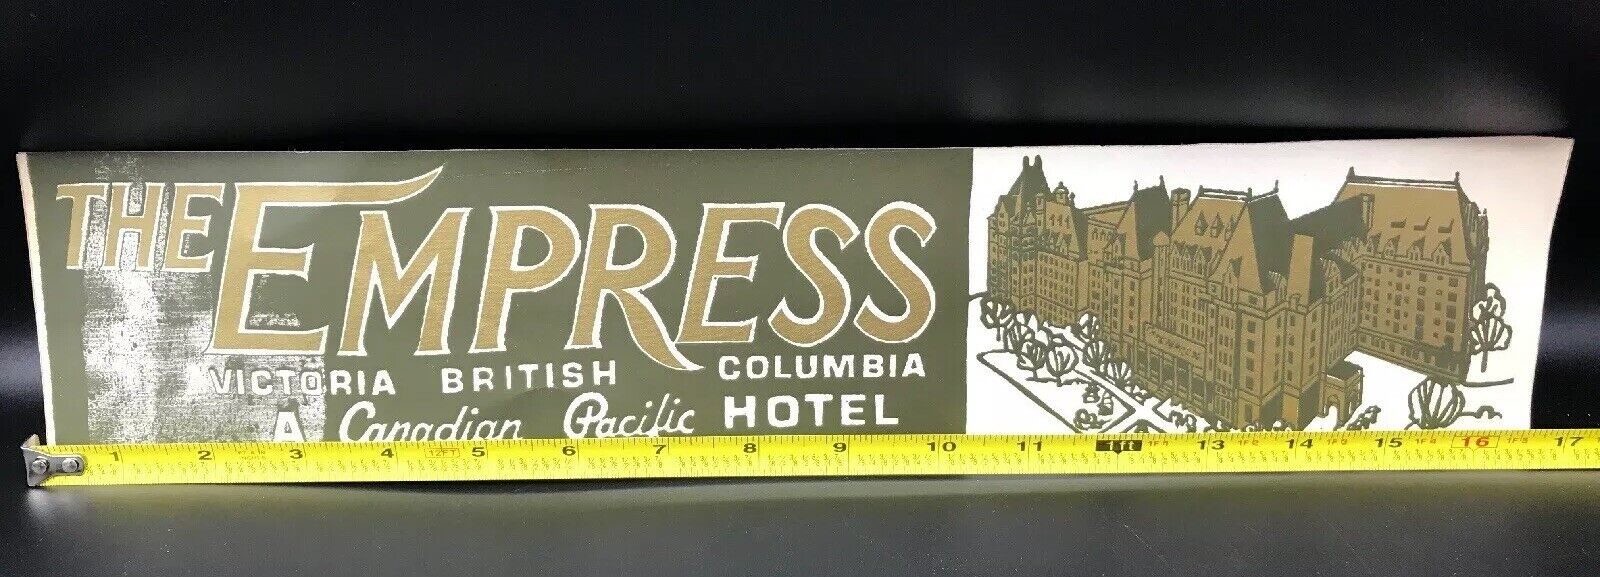 The Empress Hotel Canadian Pacific Victoria Canada Bumper Sticker Large Vintage 